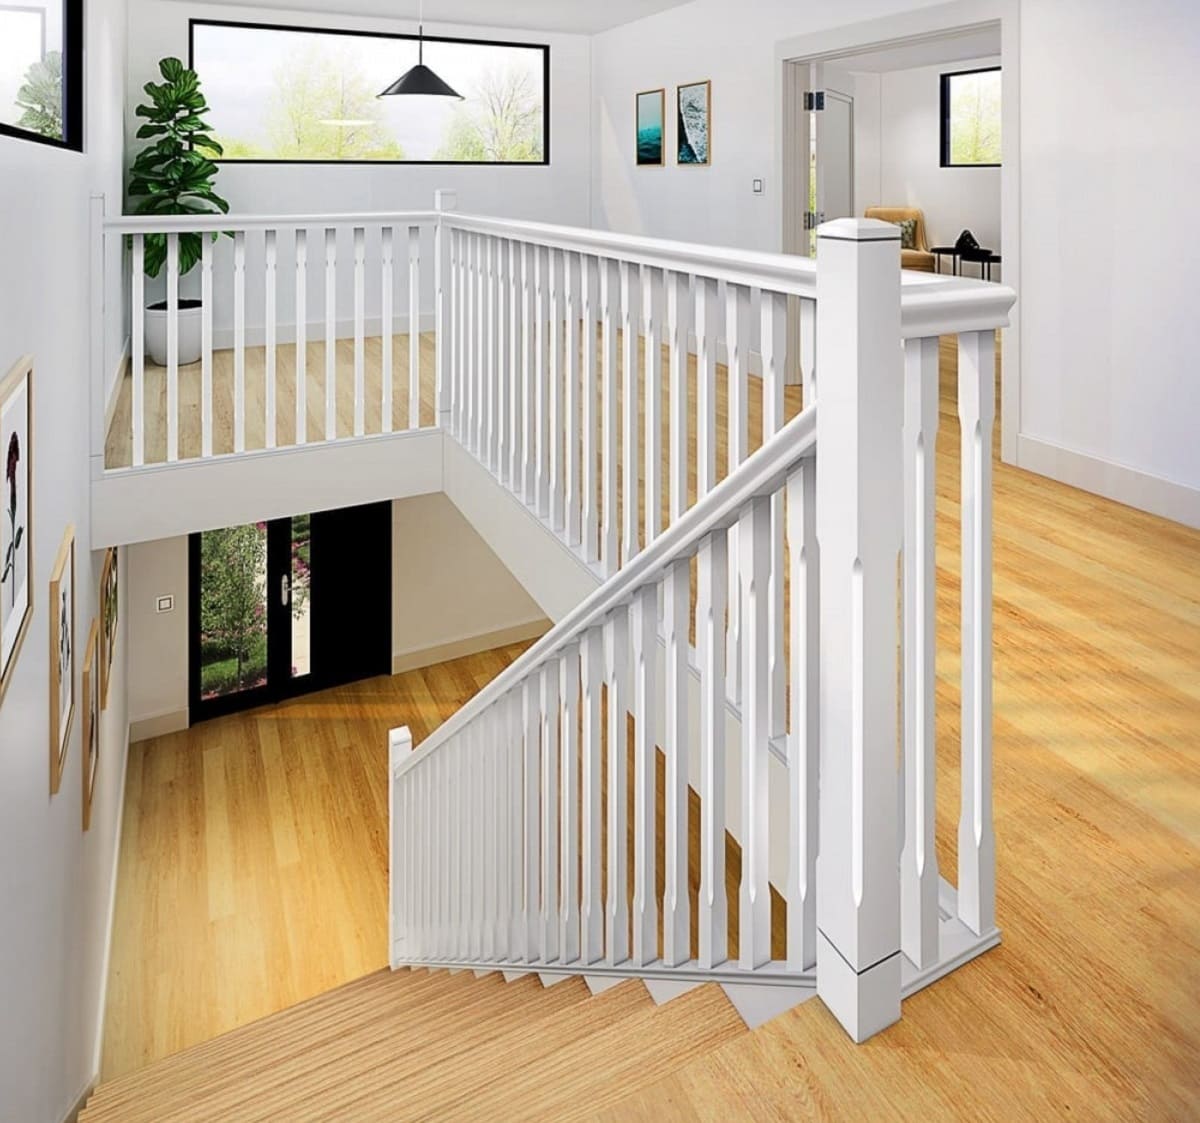 How To Install Newel Post On Flat Floor